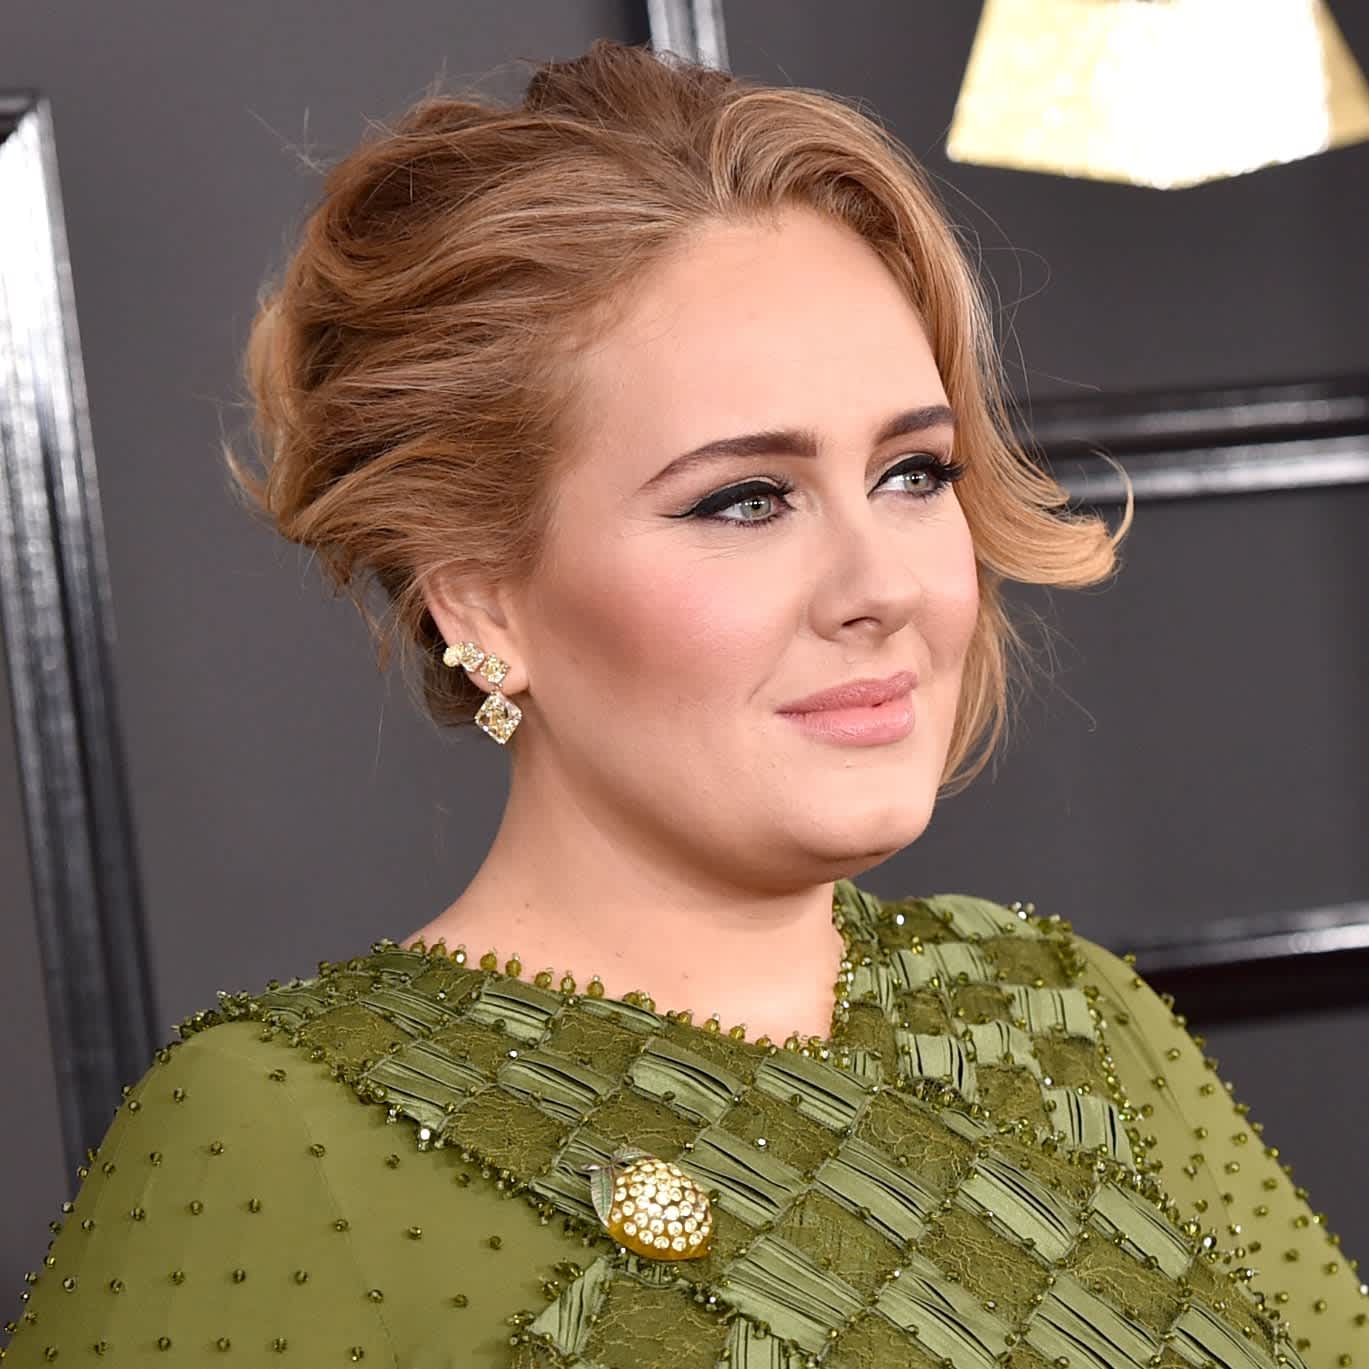 We're obsessed with Adele's new trench coat and gold earrings